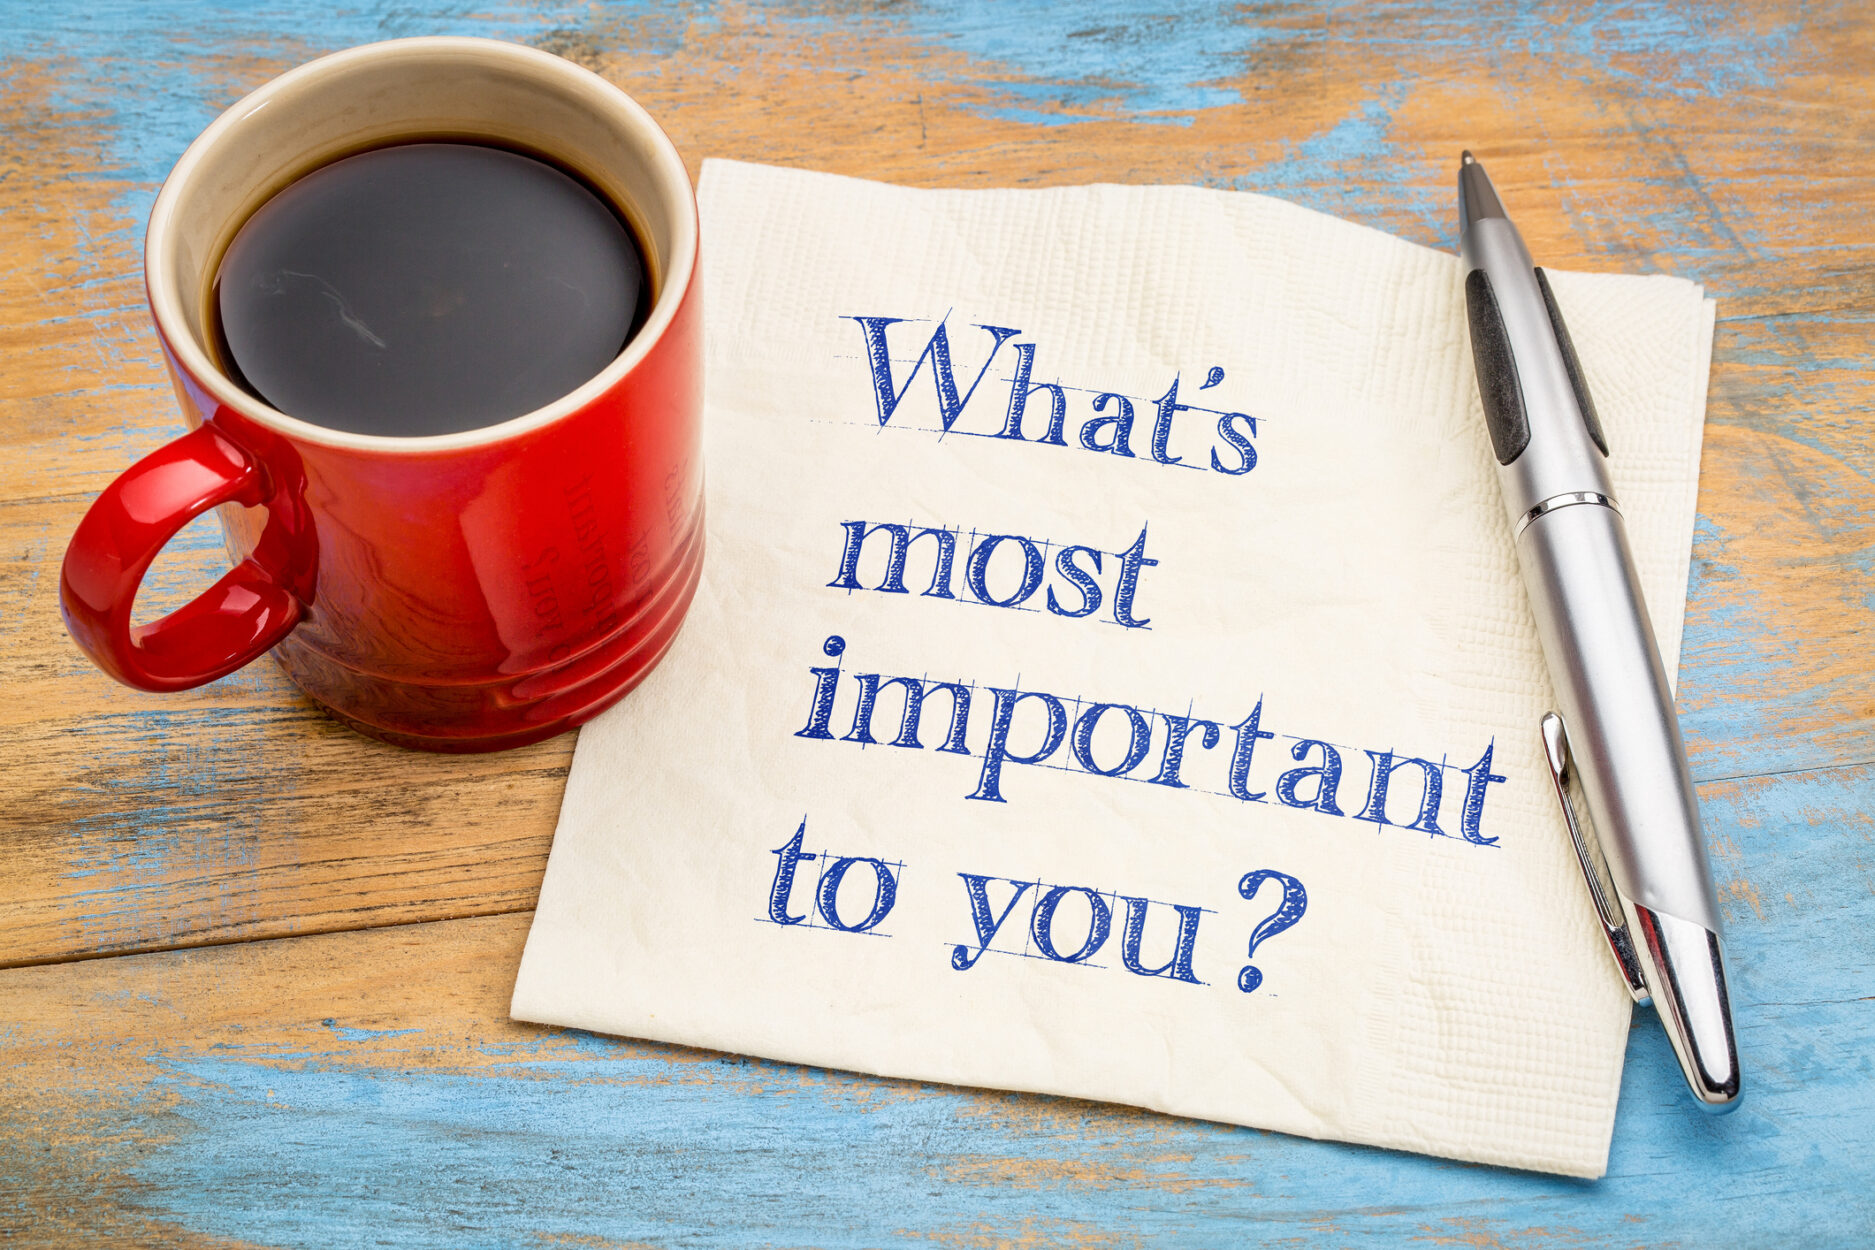 What is most important to you in estate planning